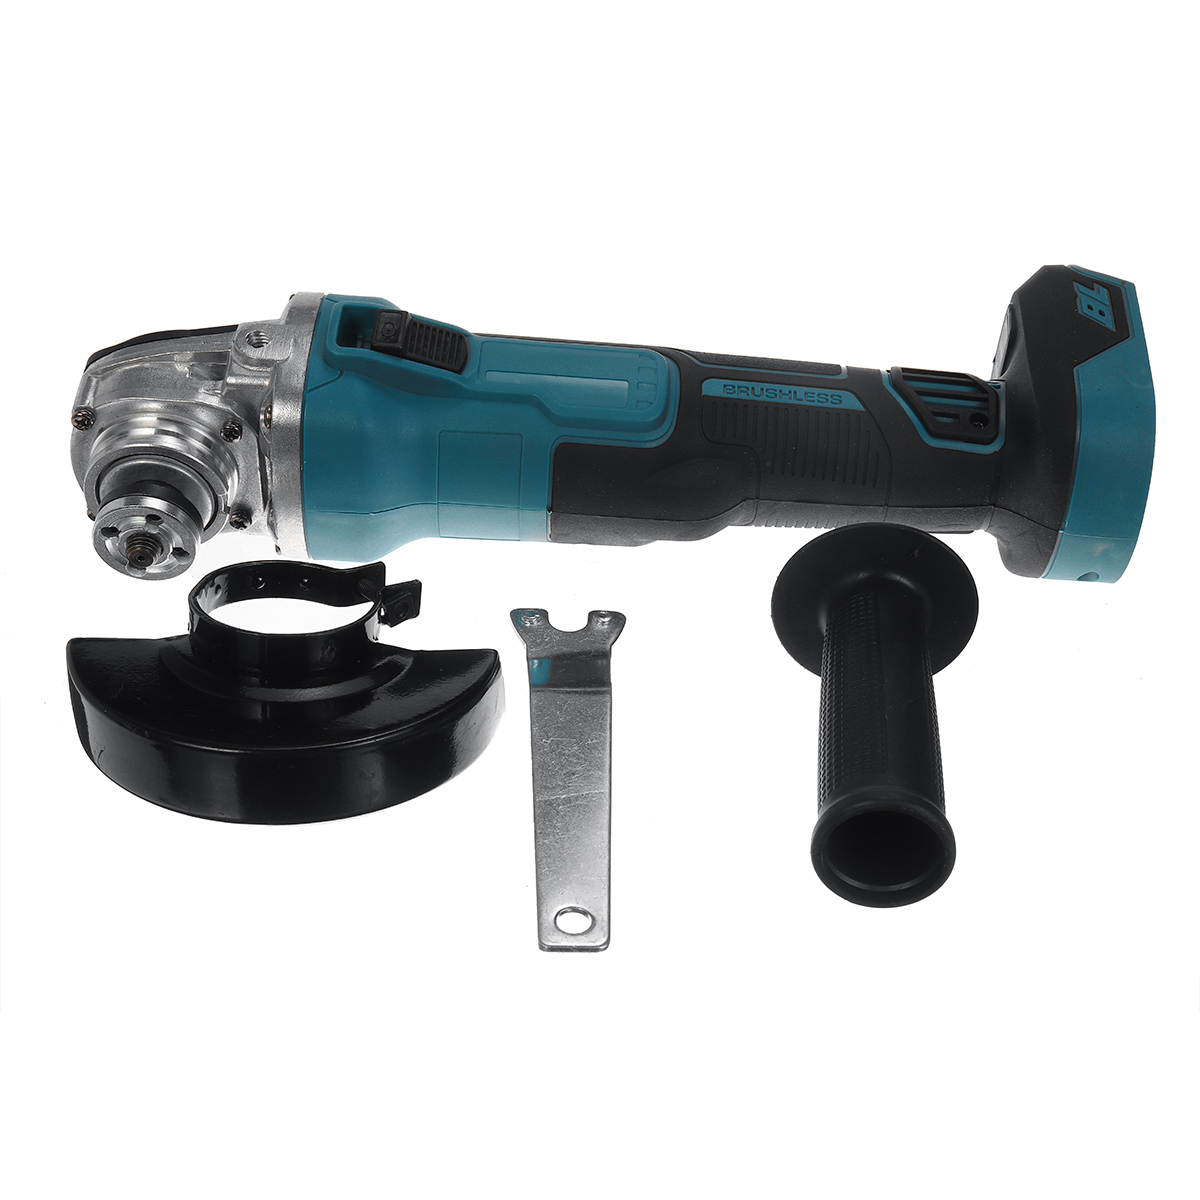 Electric-Brushless-Cordless-Angle-Grinder-M10-125mm-Cut-for-Makita-18V-Battery-1791879-7